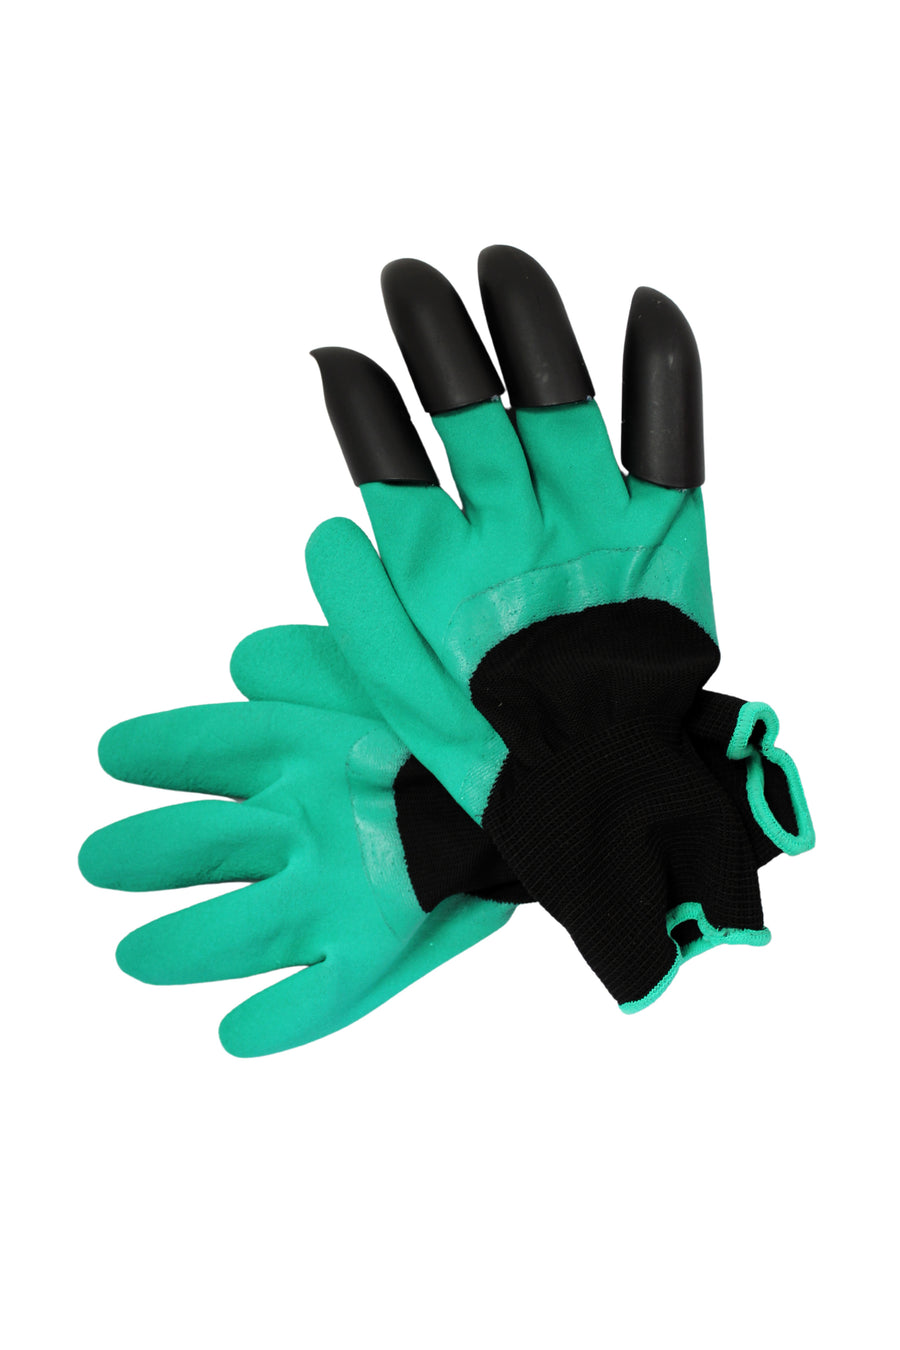 Waterproof  Garden Gloves With Claws For Digging and Planting - 1 Pair